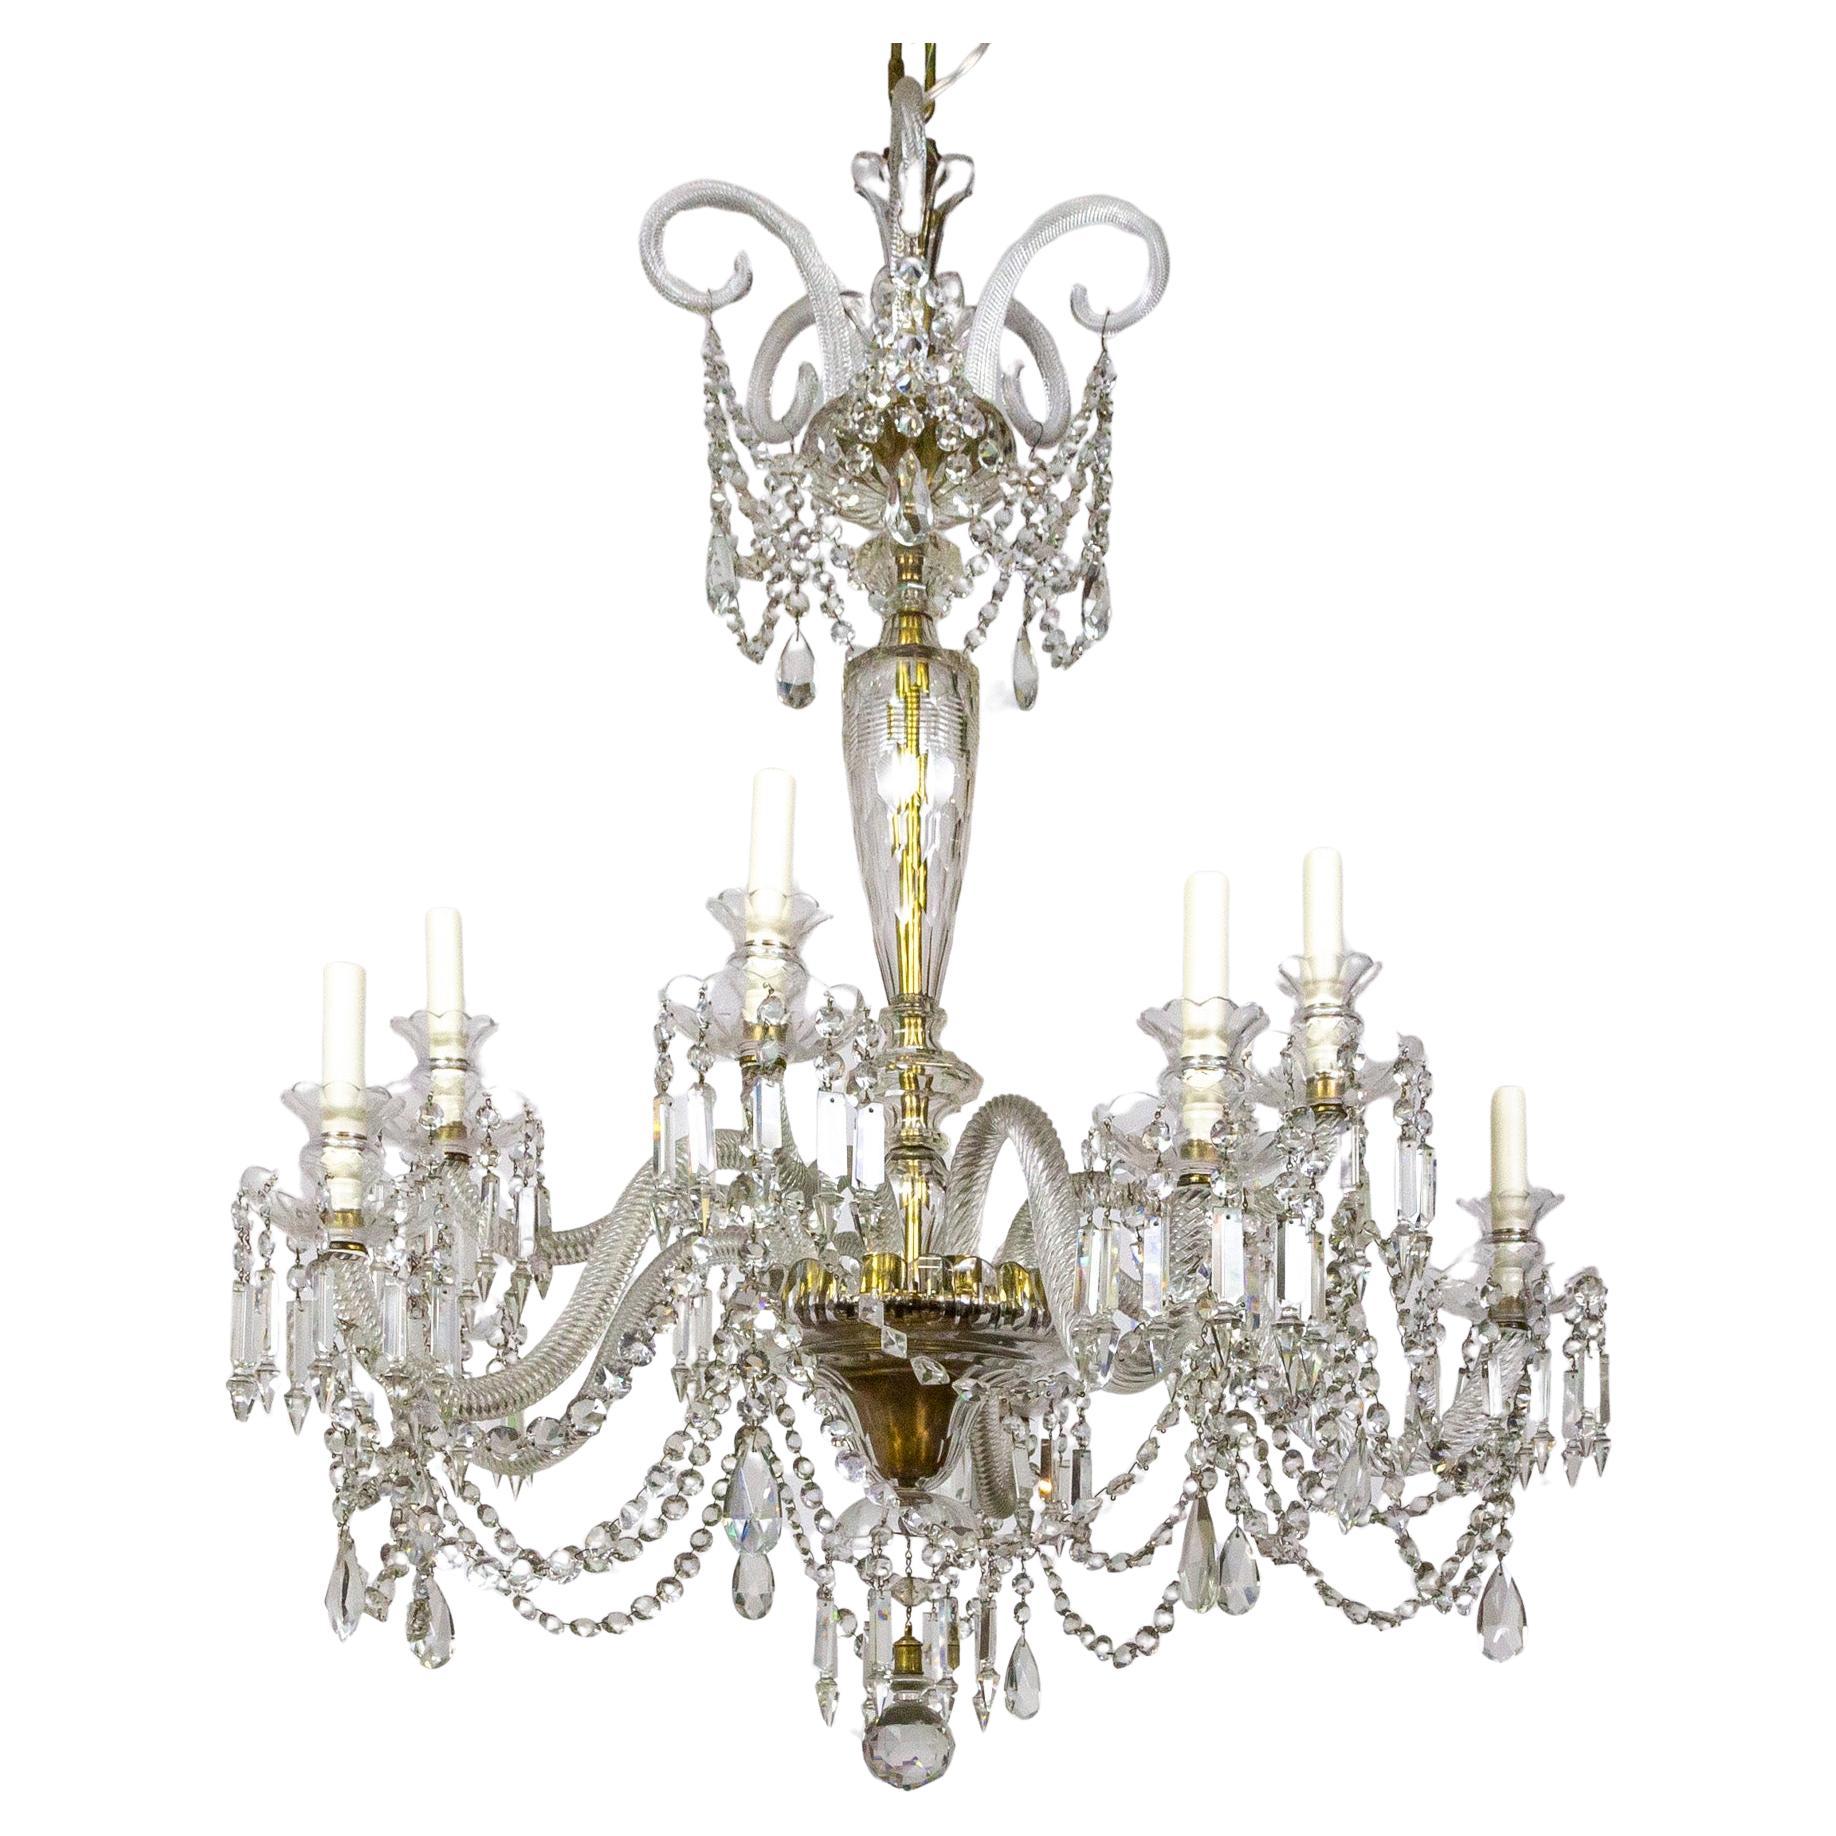 Grand Cut Crystal George III Chandelier w/ Faceted Column  For Sale